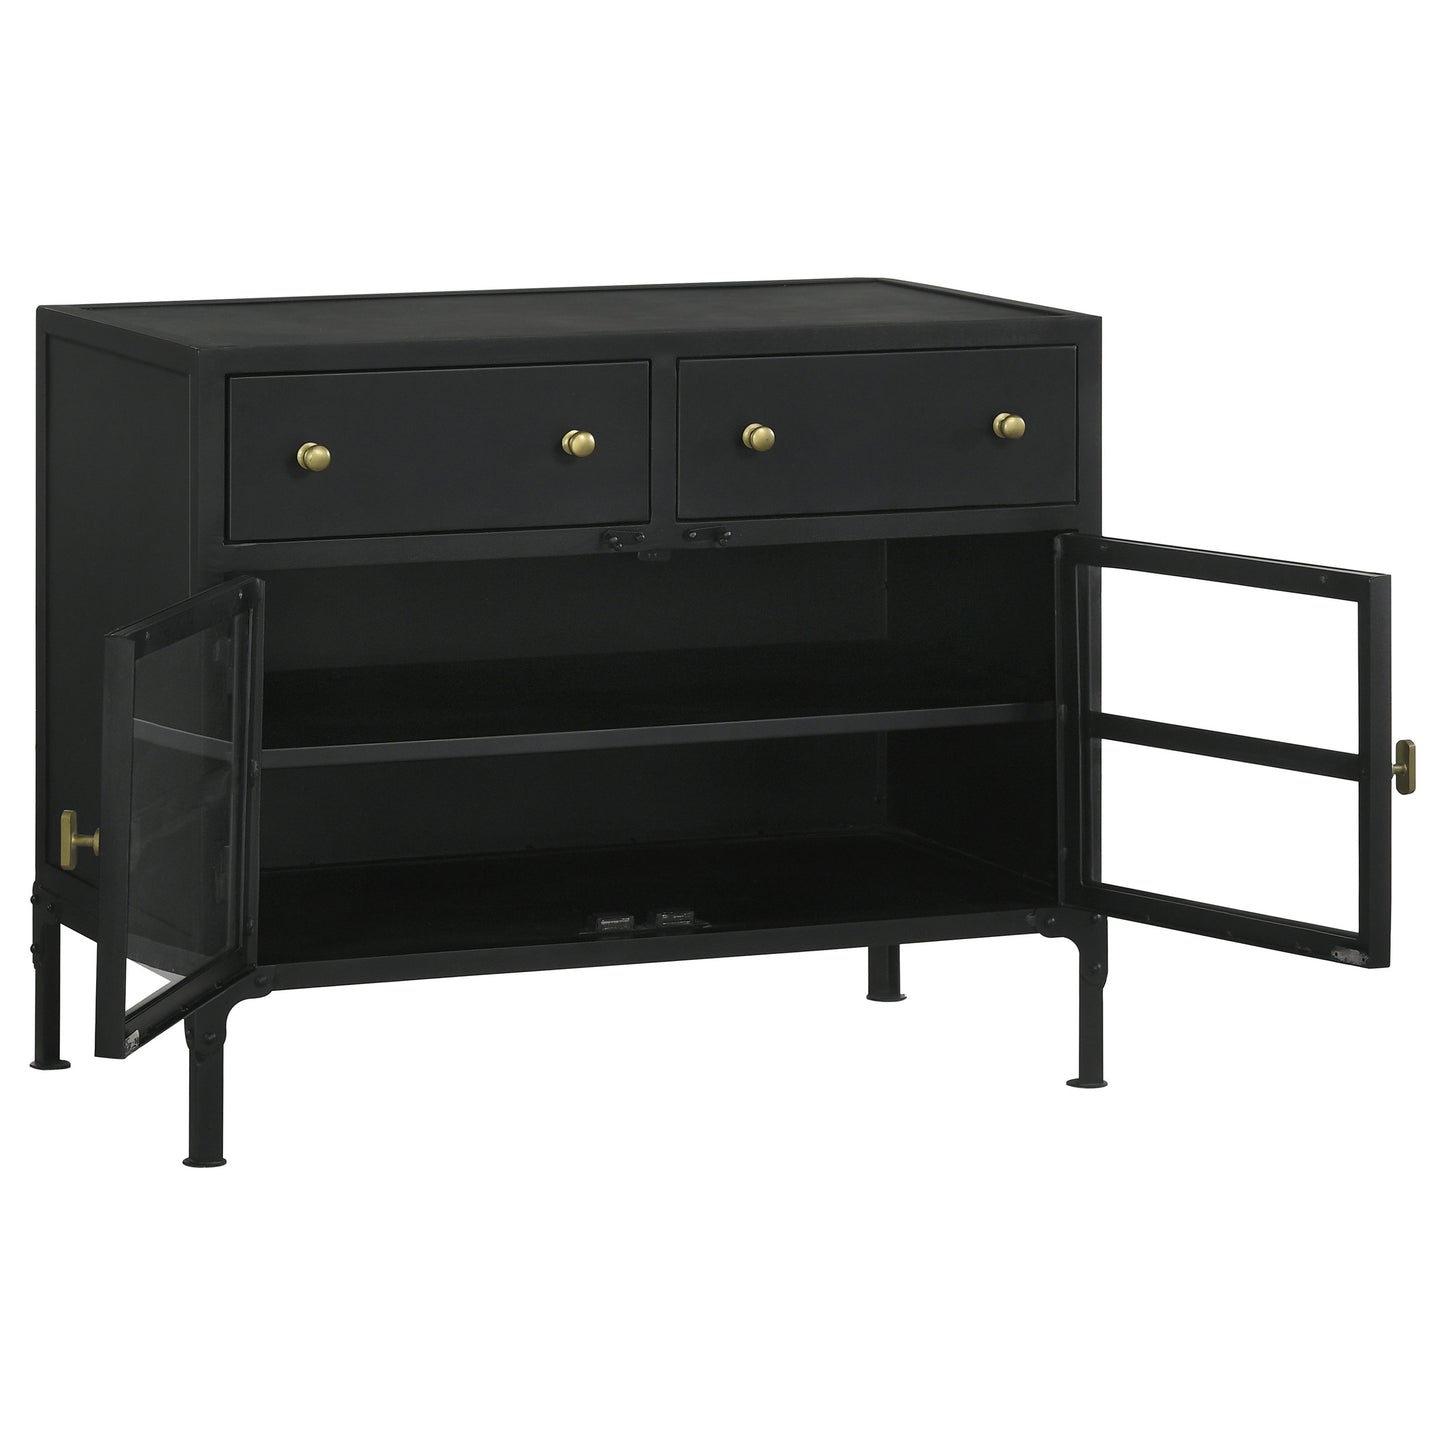 Sadler 2-drawer Accent Cabinet with Glass Doors Black